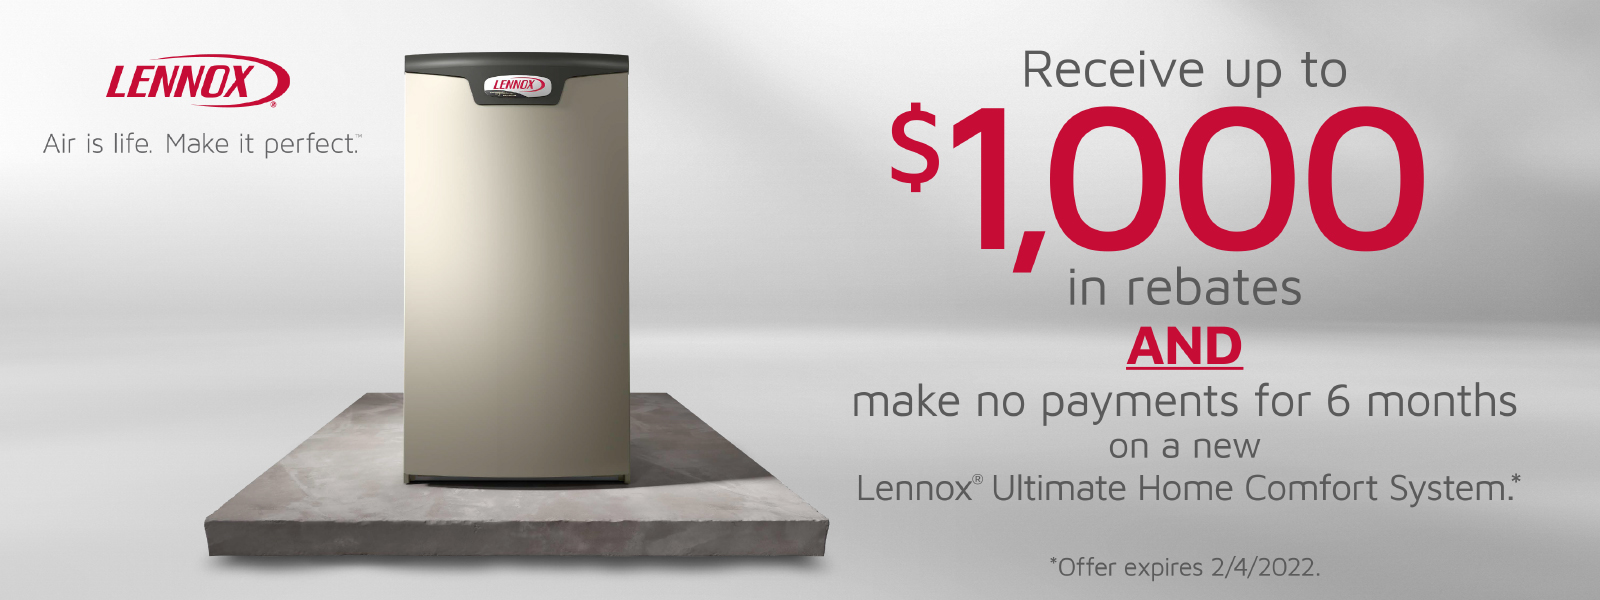 Furnace Air Conditioner Rebates Promotions Ontario Climate Experts